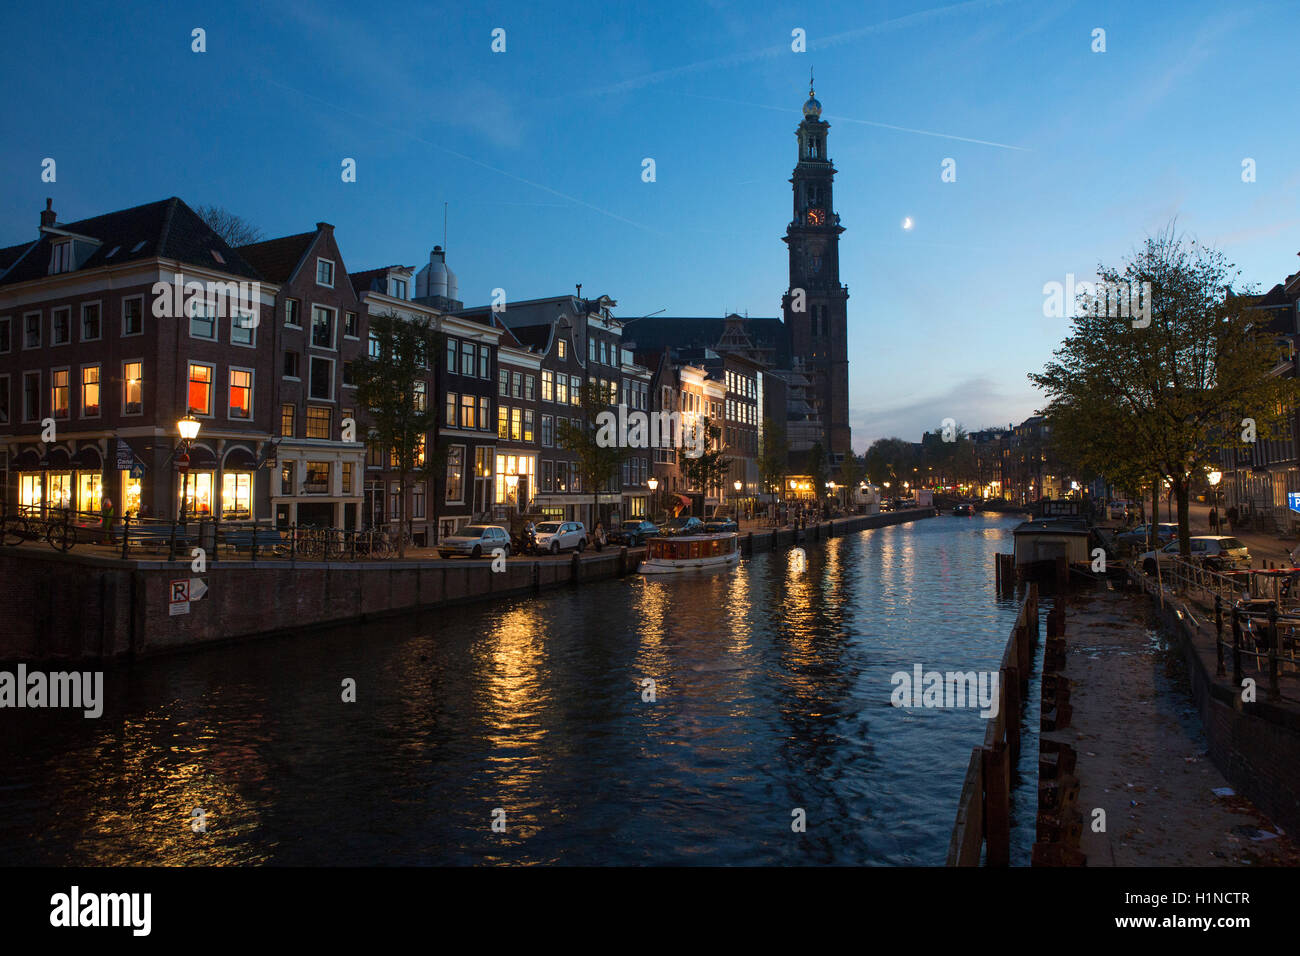 View of the Weterkerk or Wester Church at twilight on the banks of the canals in Amsterdam. Stock Photo